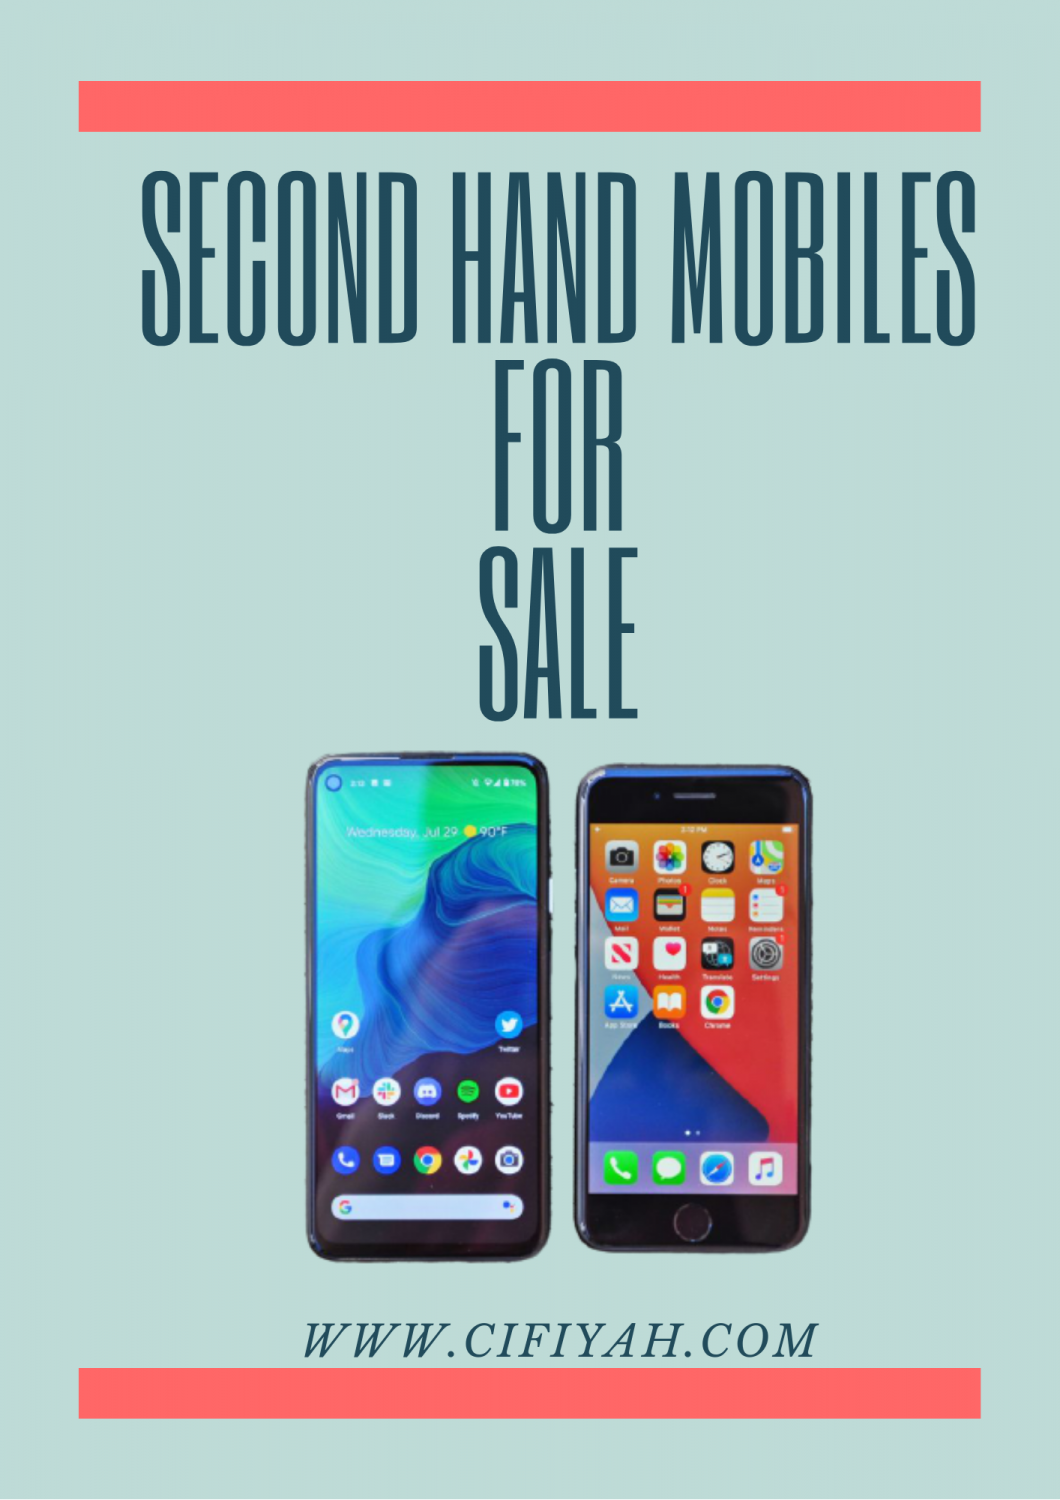 second hand mobiles for sale on cifiyah.com